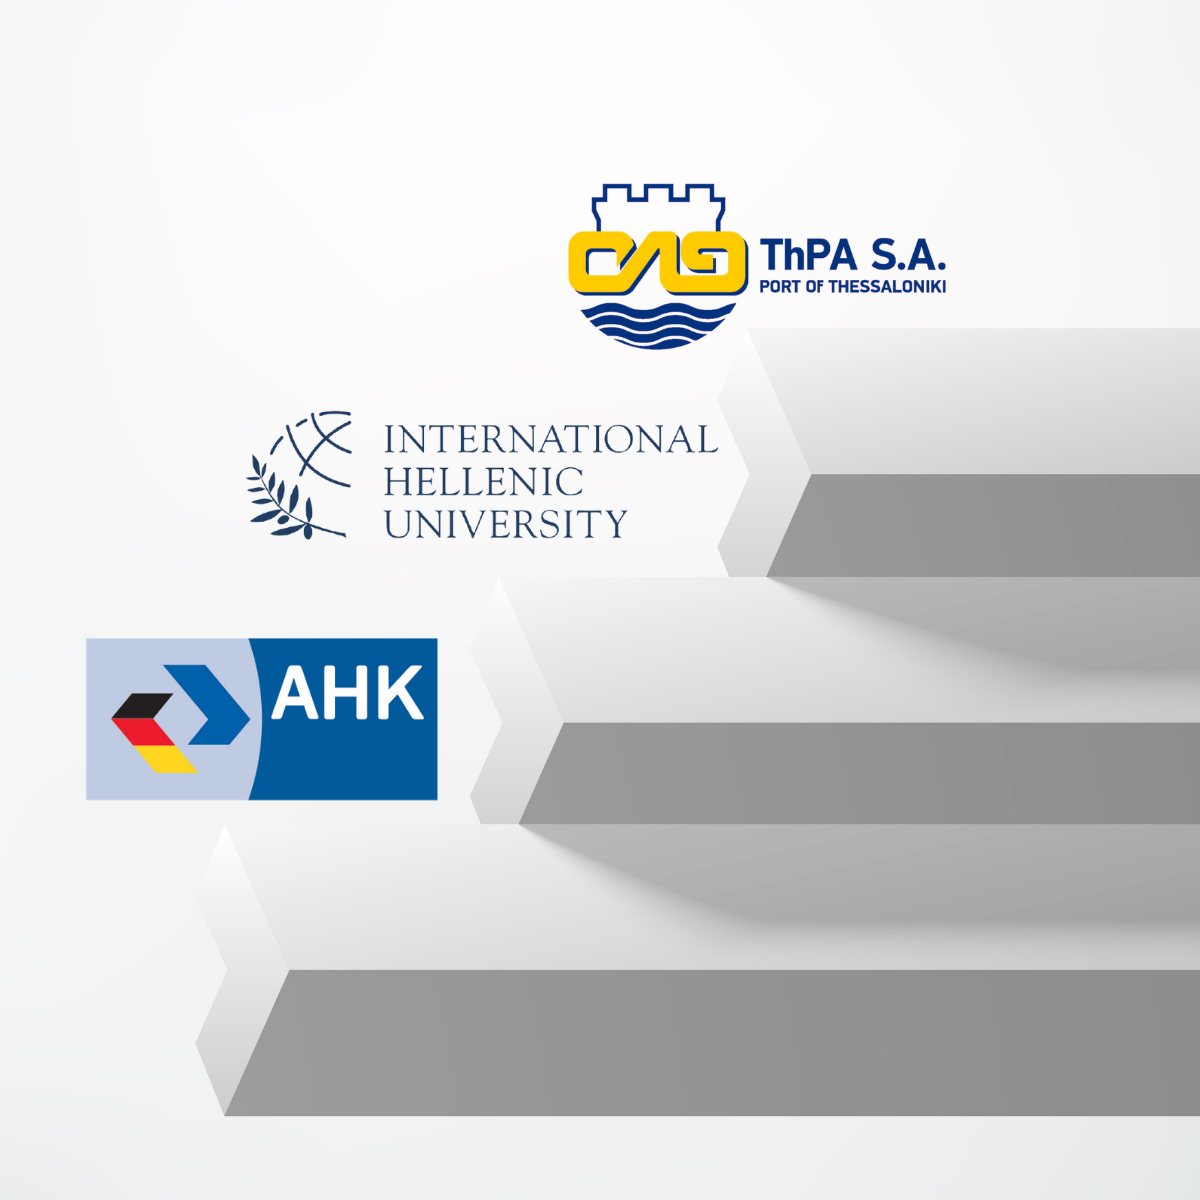 Memorandum of Understanding between ThPA S.A. the International Hellenic University and the German Hellenic Chamber of Industry and Commerce